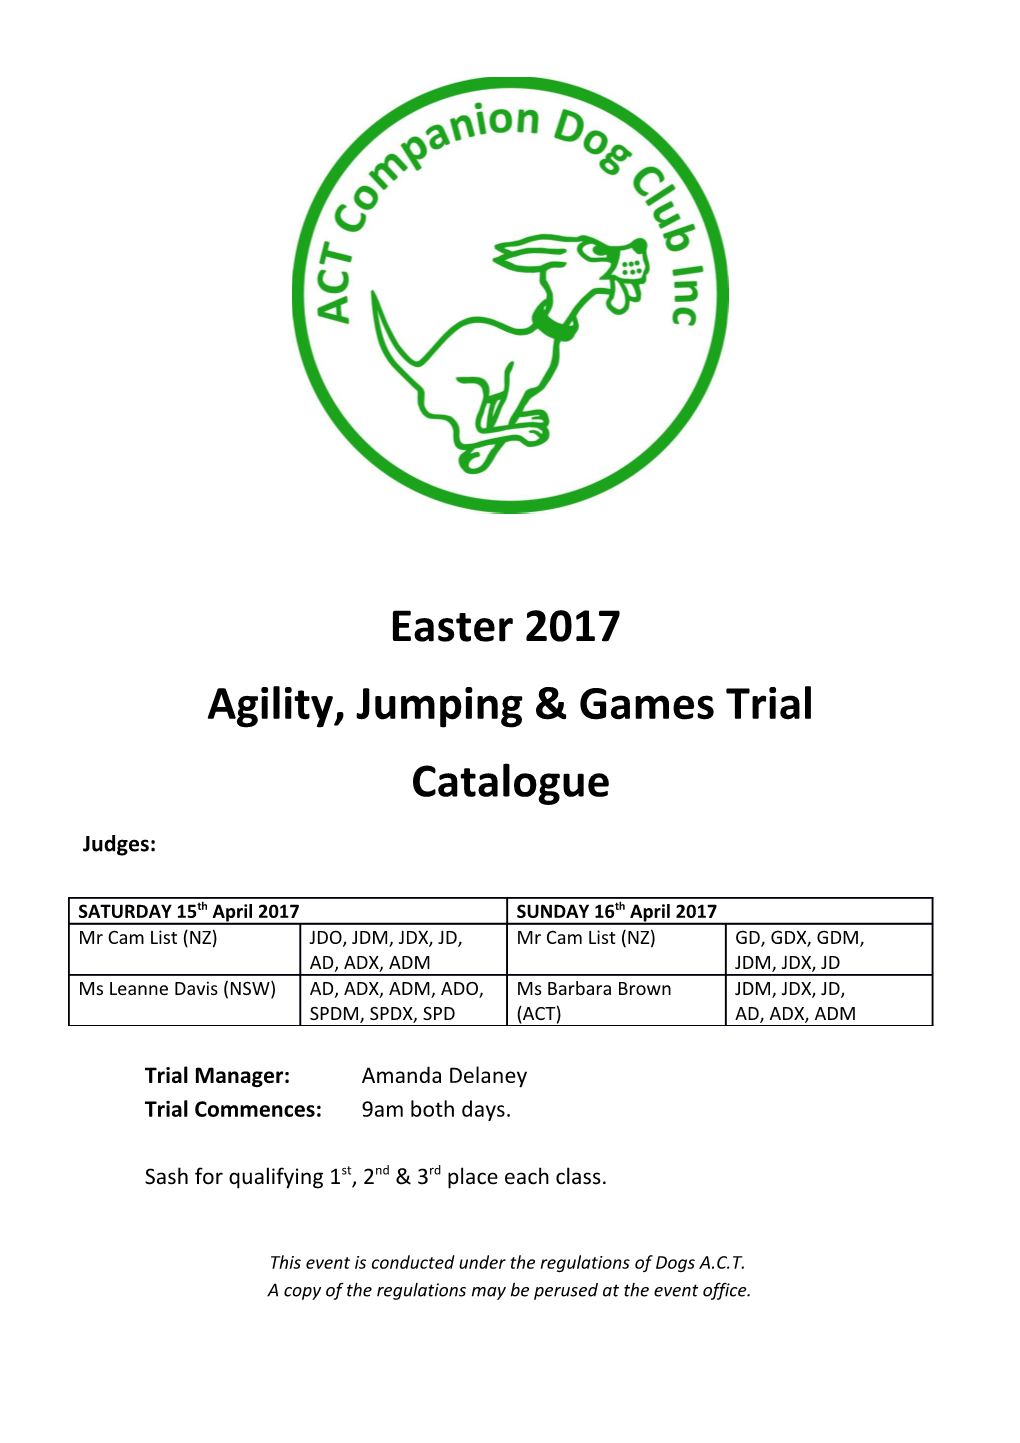 Agility, Jumping & Games Trial